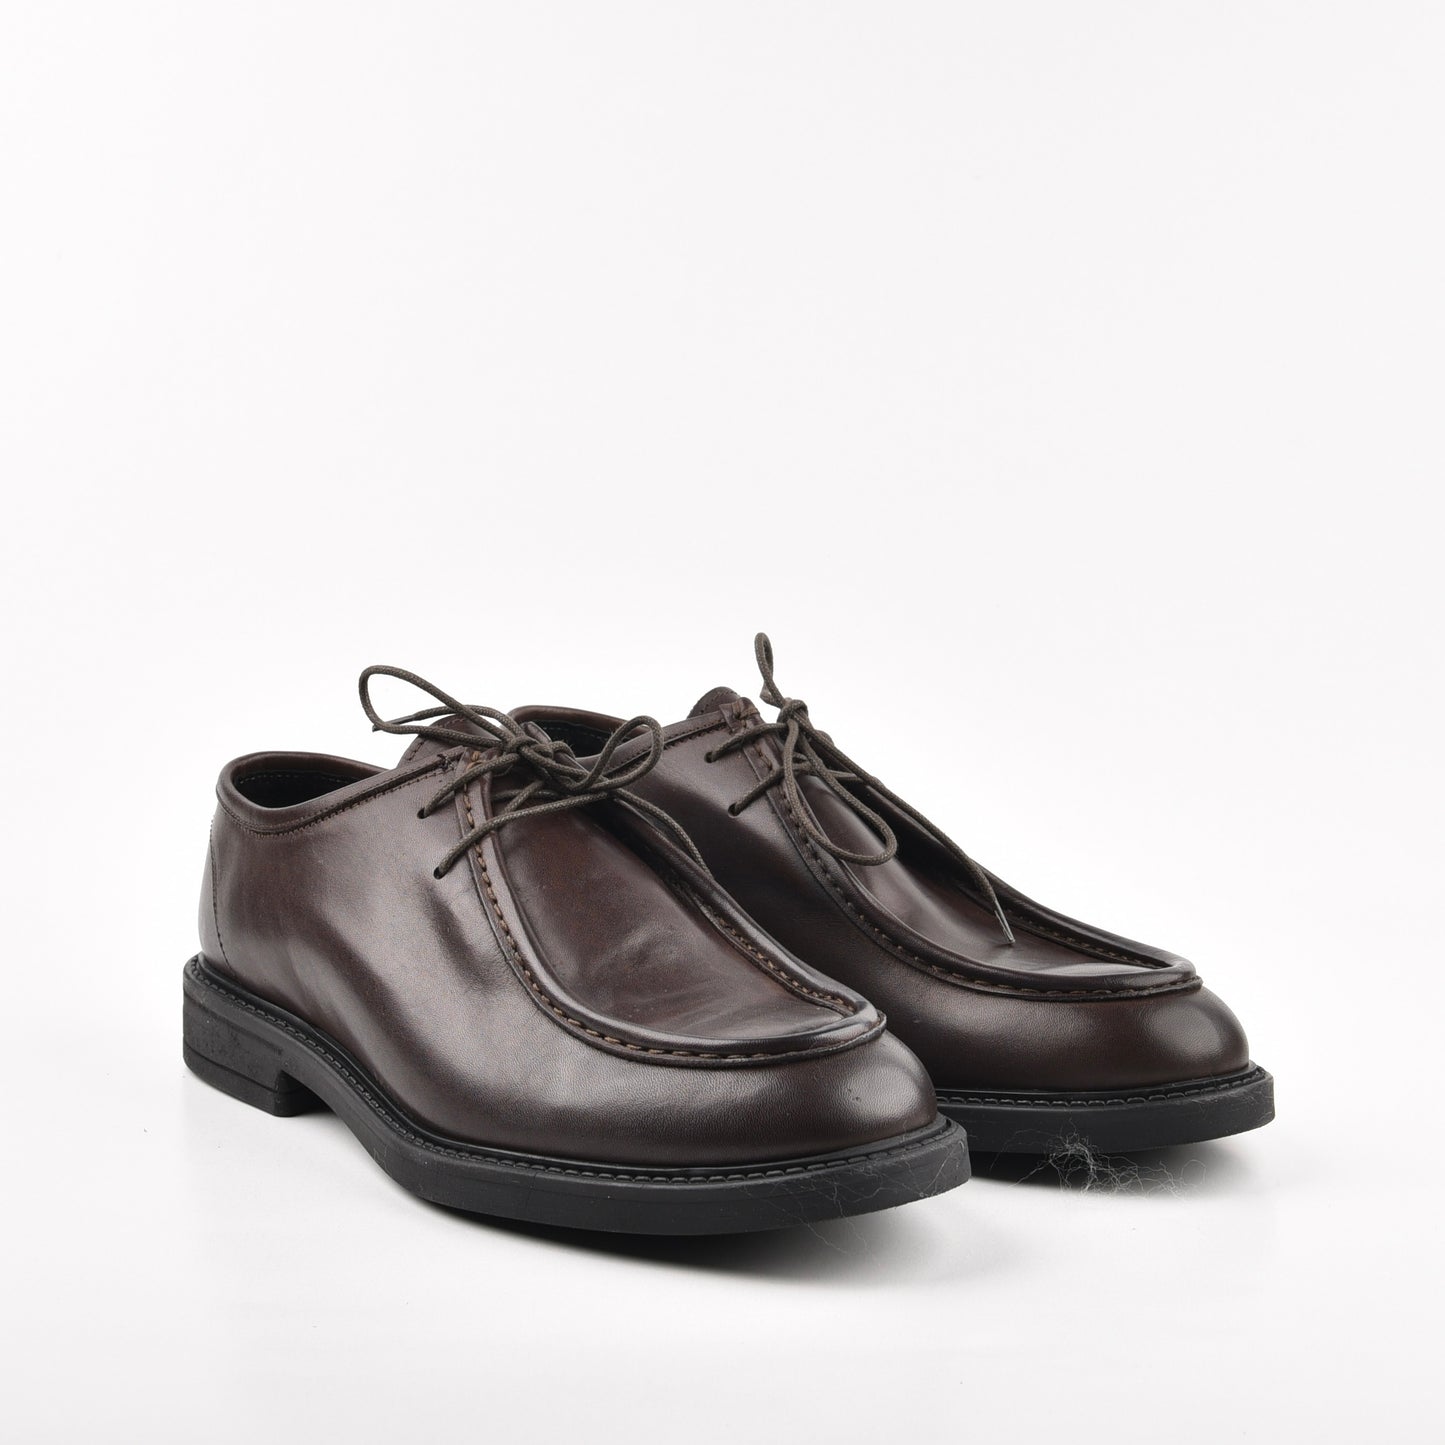 shalapi italian lace up shoes for men in Dark brown